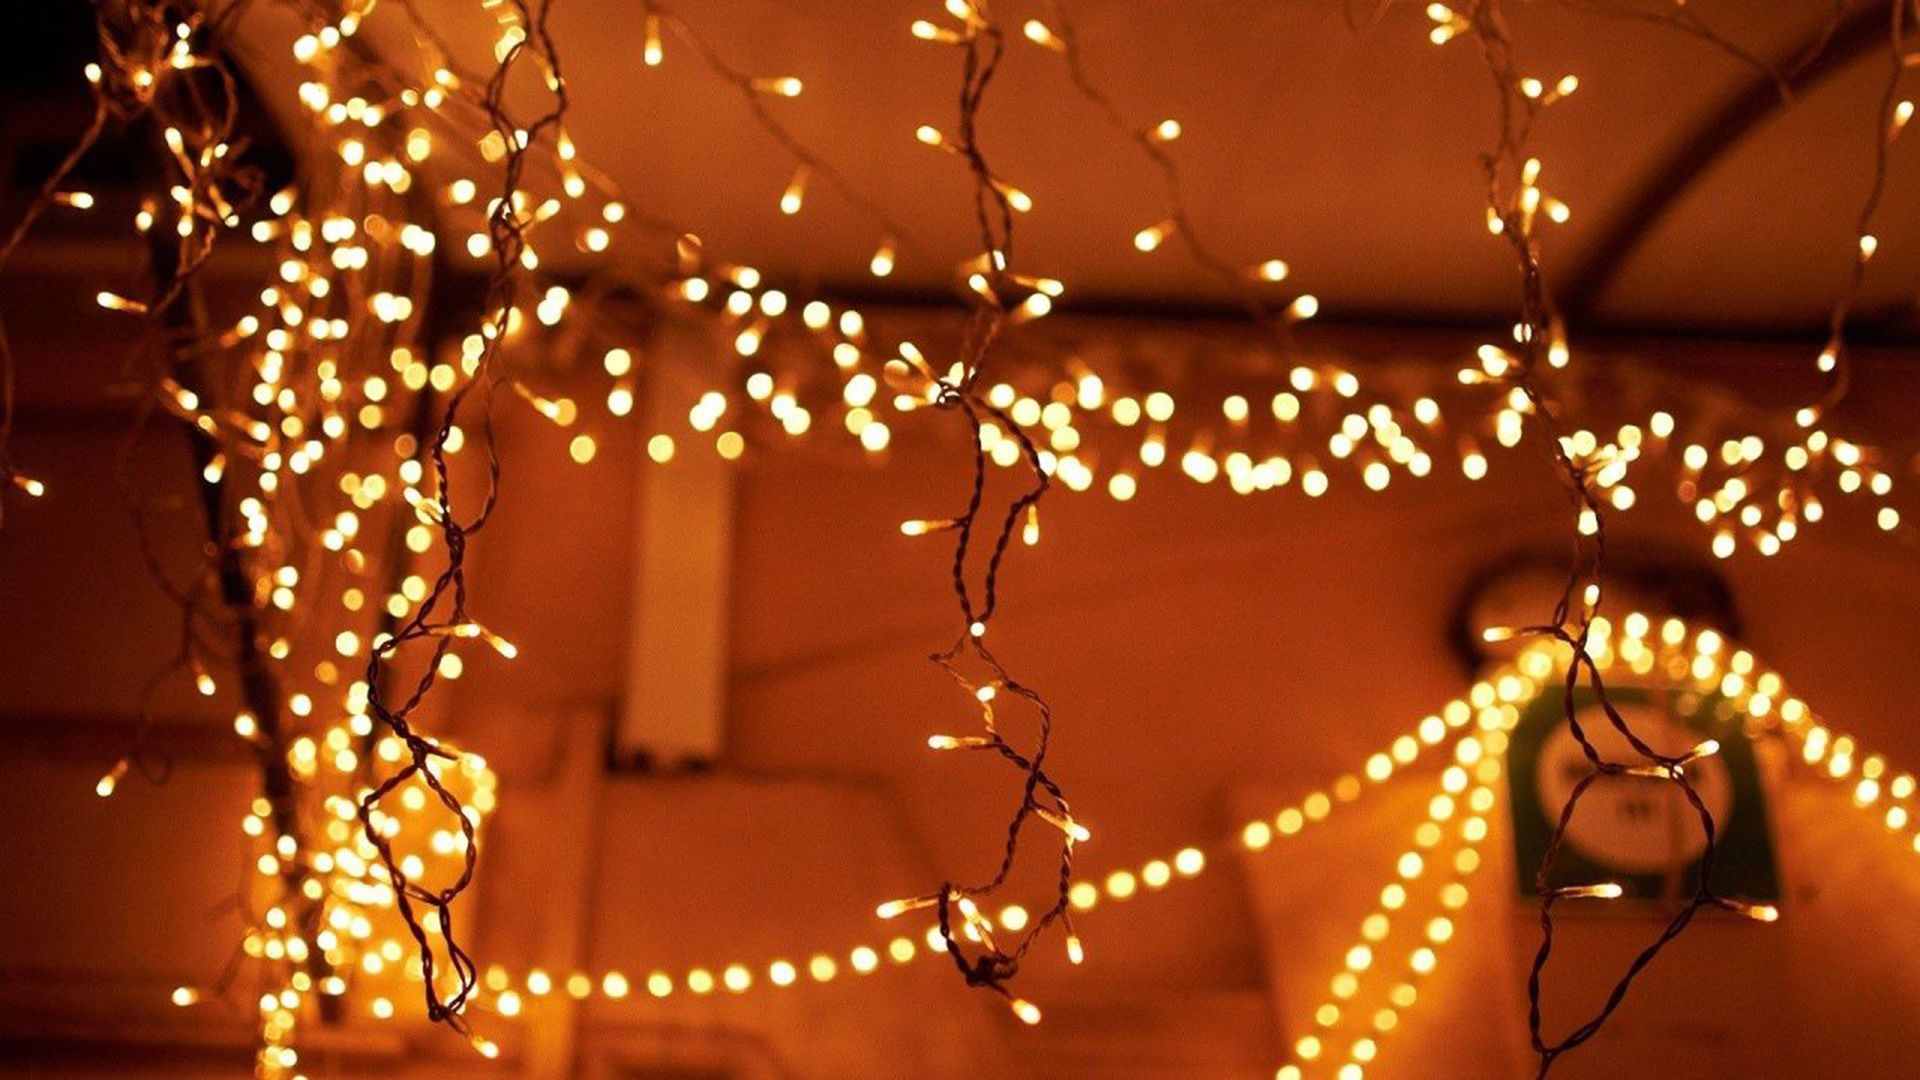 Aesthetic Christmas Lights Wallpaper HD for PC Free Download